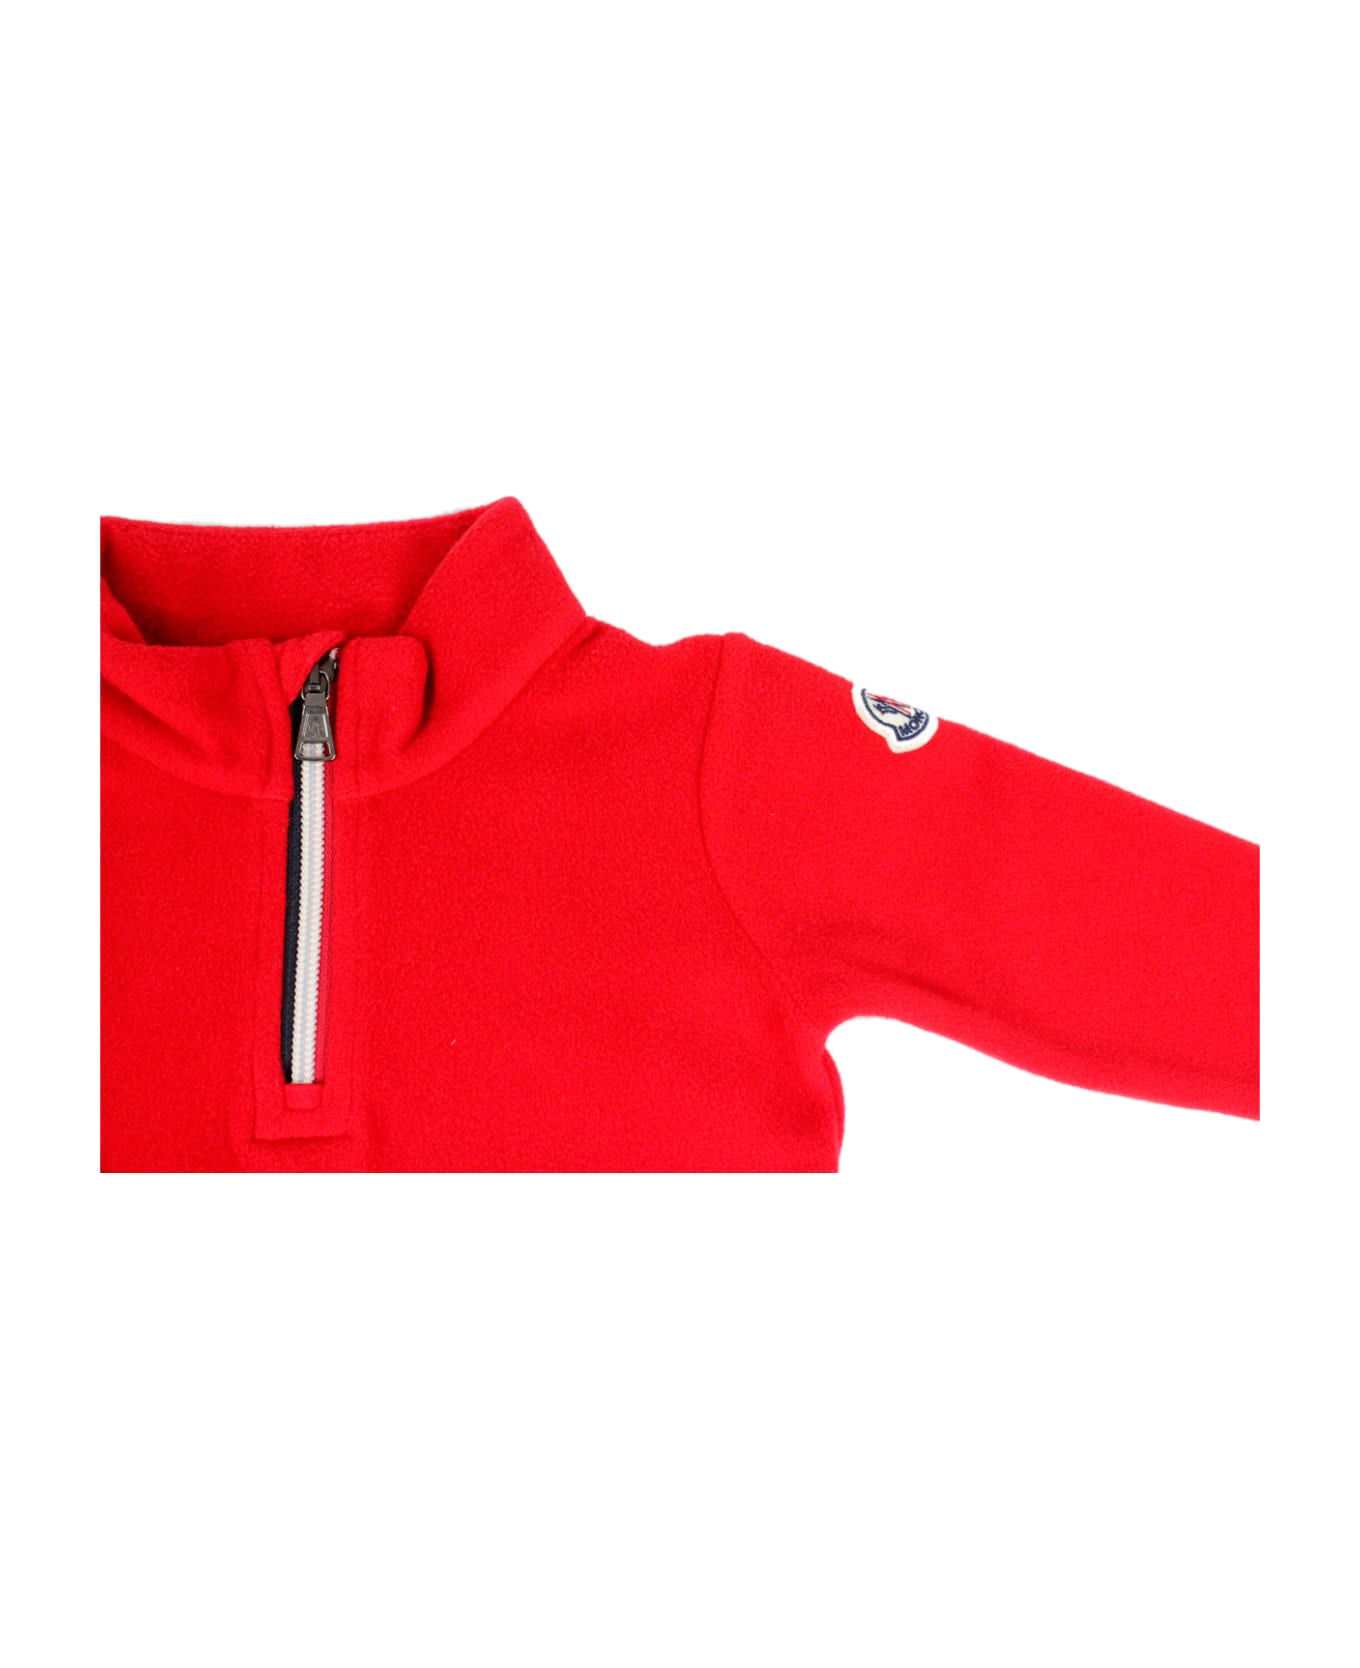 Moncler Complete Jogging - Red ボディスーツ＆セットアップ